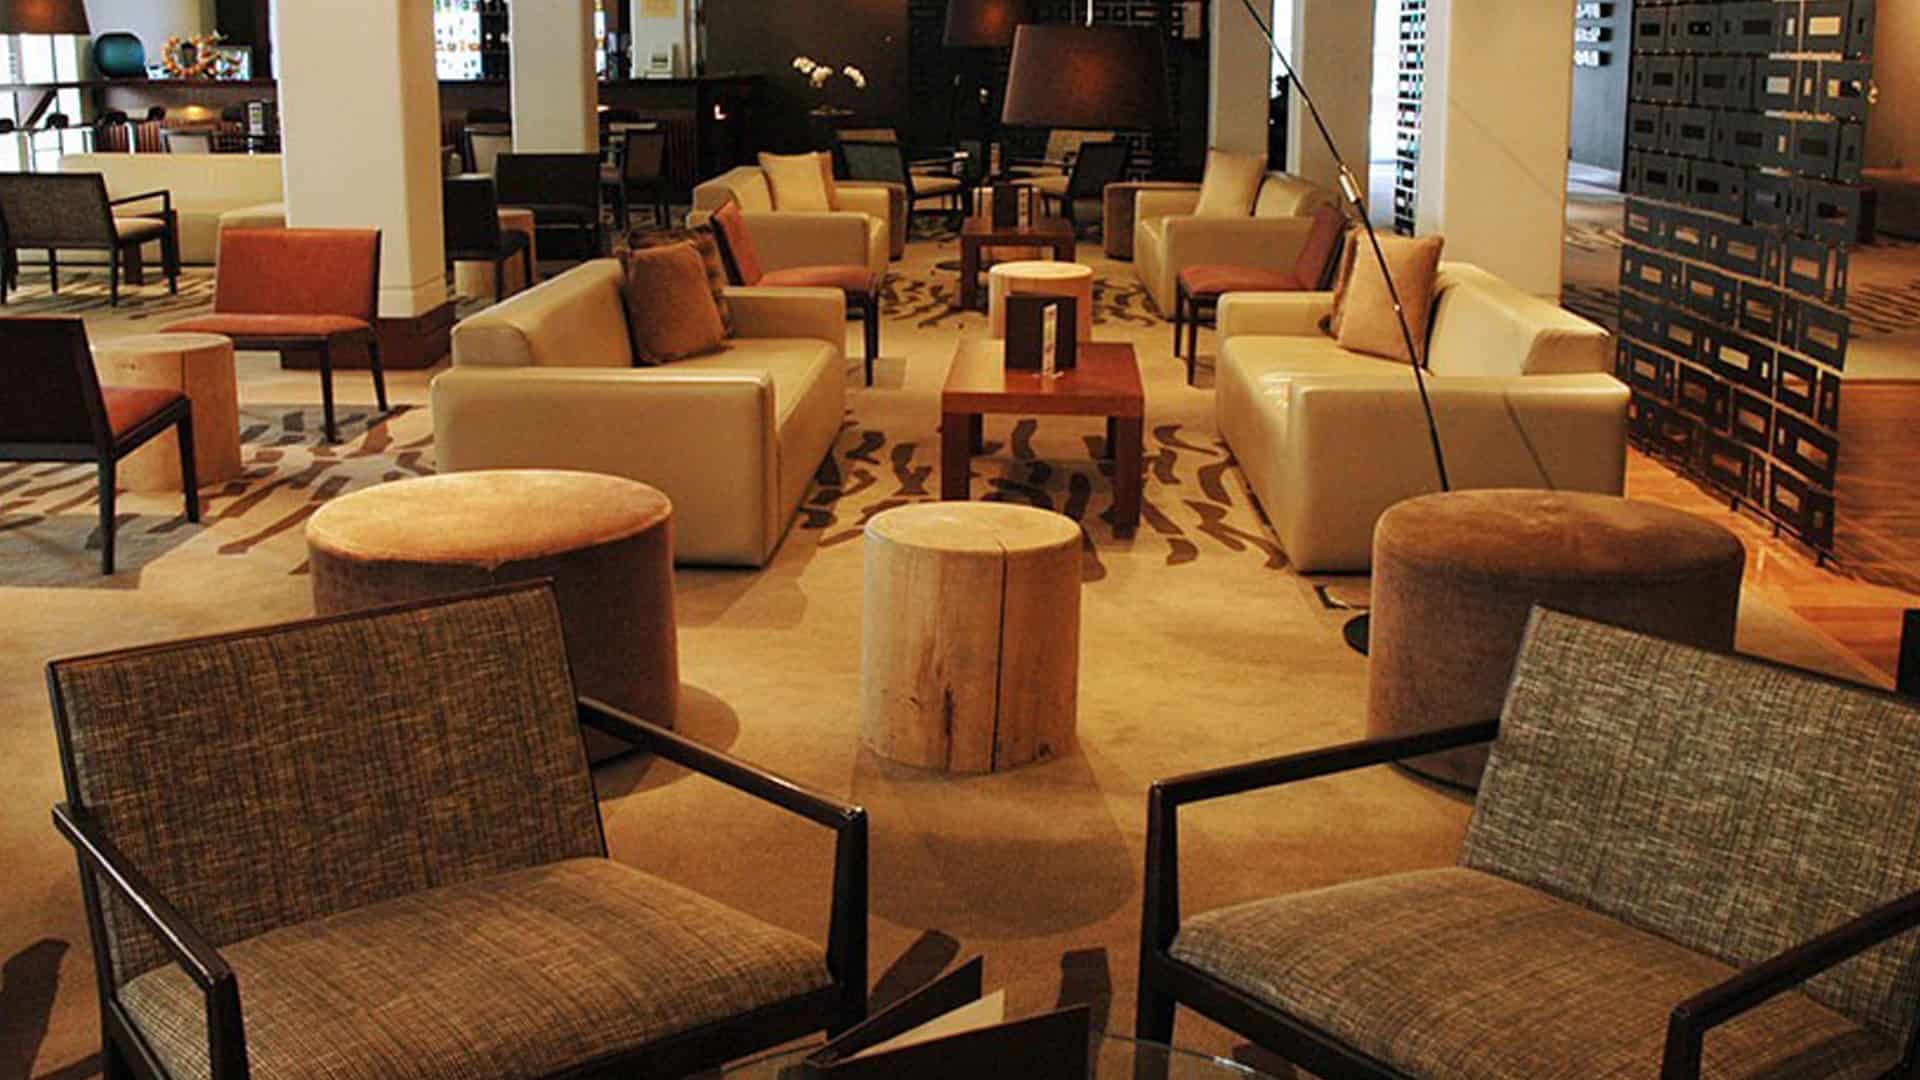 Heritage hotel in Auckland bar design with lounge seating